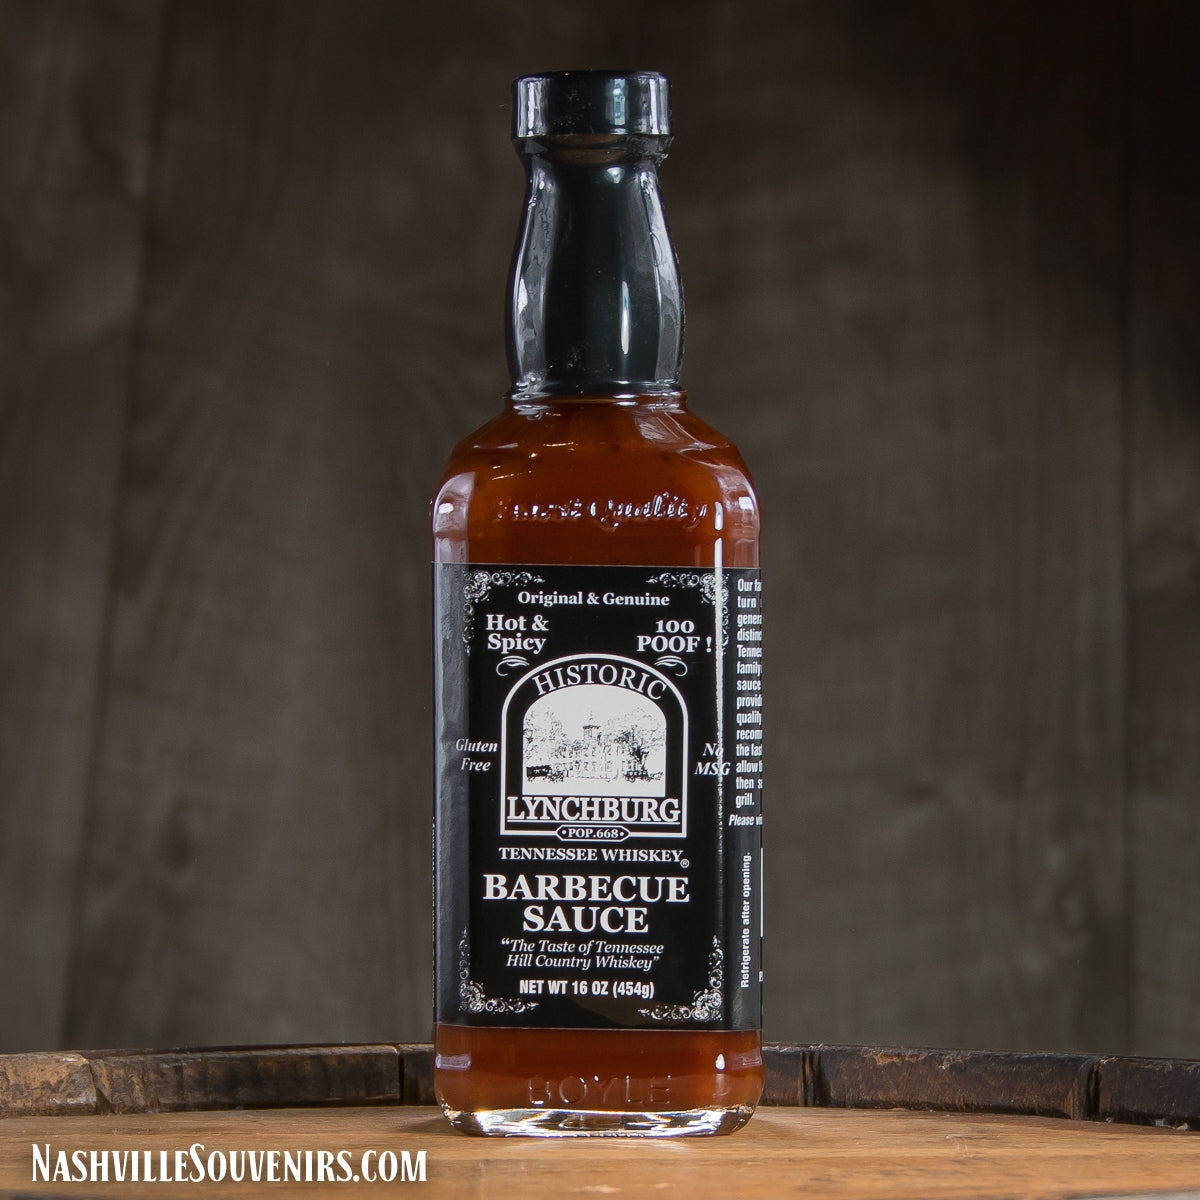 Buy Historic Lynchburg BBQ sauce that's hot and spicy with real Jack Daniels Tennessee whiskey.  FREE SHIPPING on all US orders over $75!